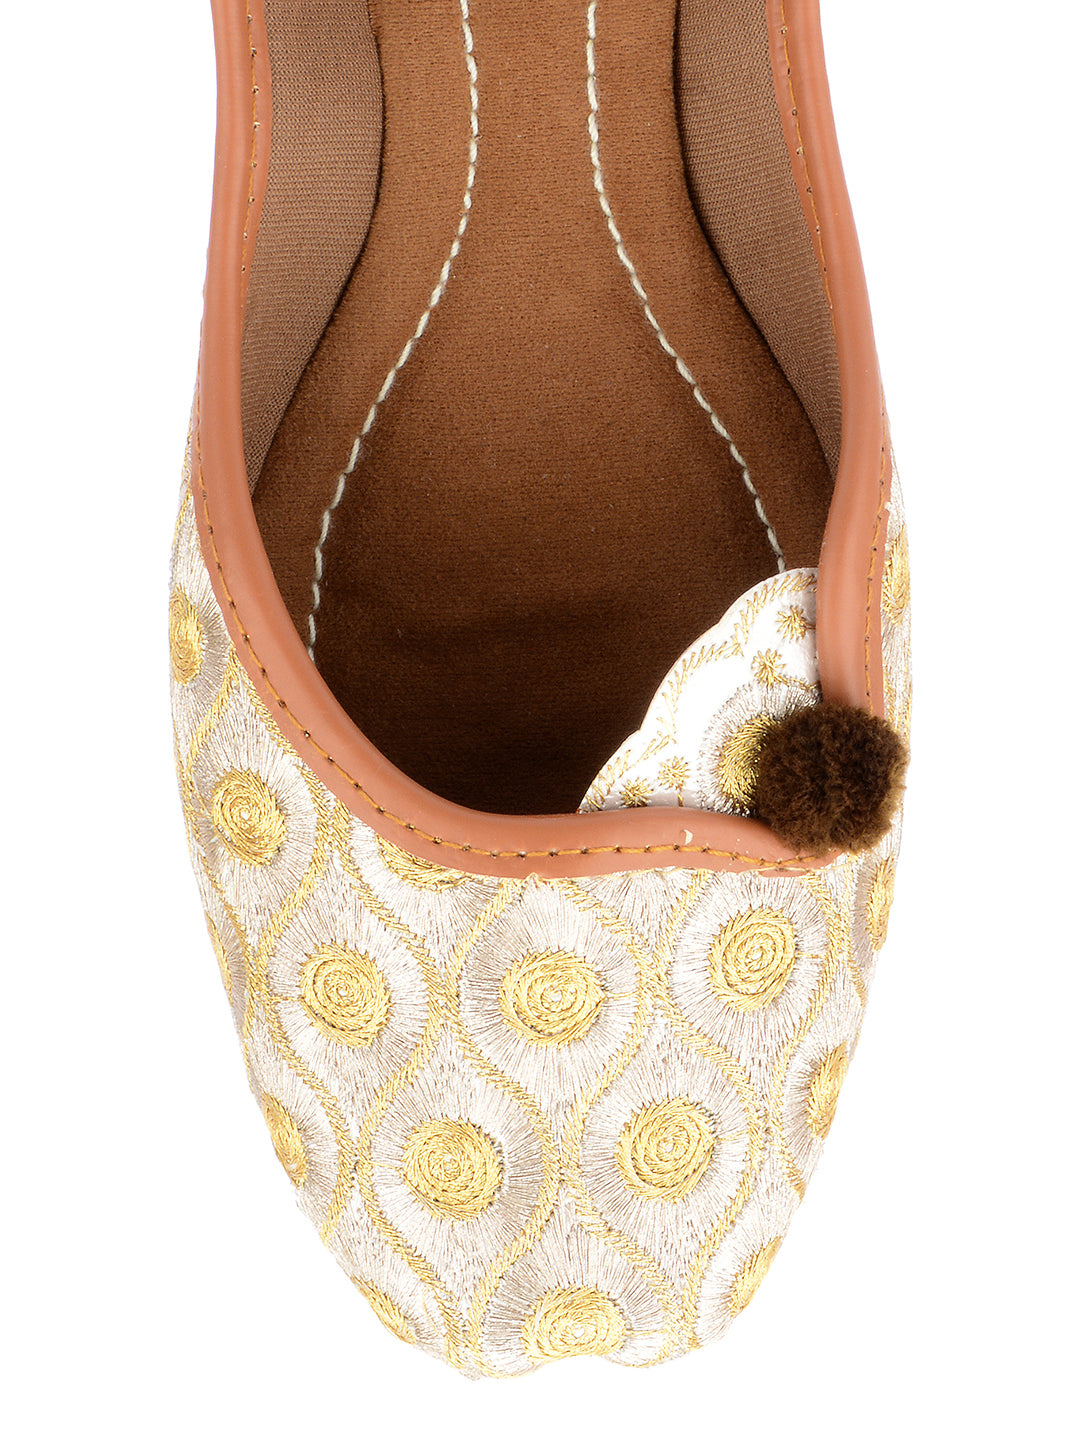 DESI COLOUR Women Gold  Silver Embroidered Leather Ethnic Mojaris Flats